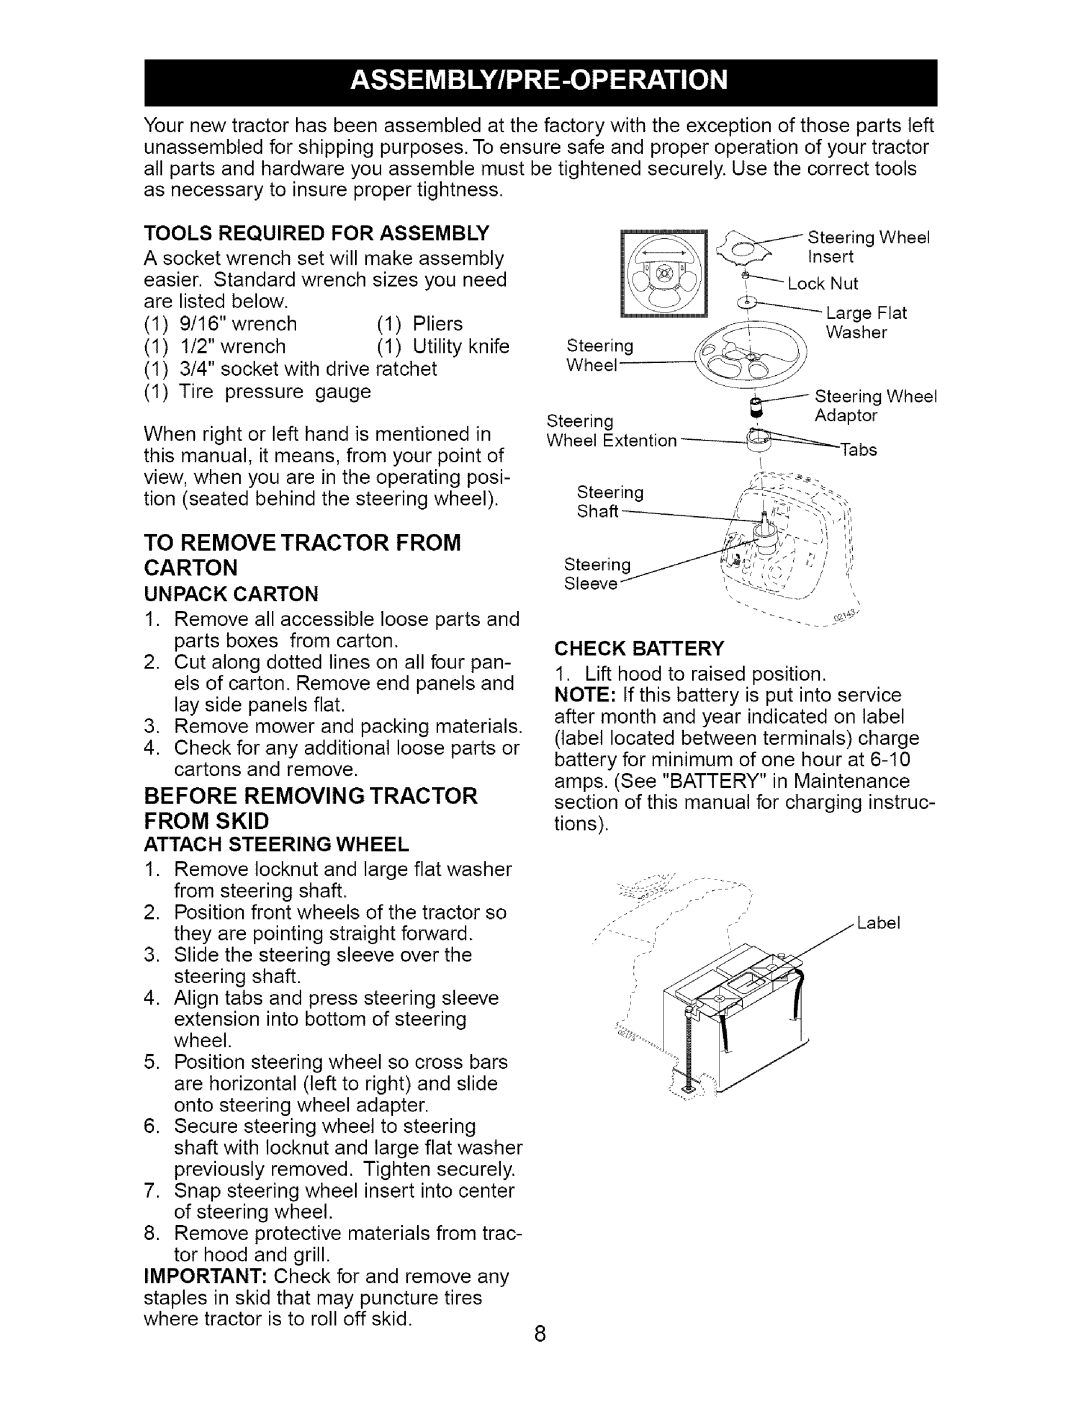 Craftsman 917.27623 owner manual To Remove Tractor From Carton, Tools Required For Assembly 